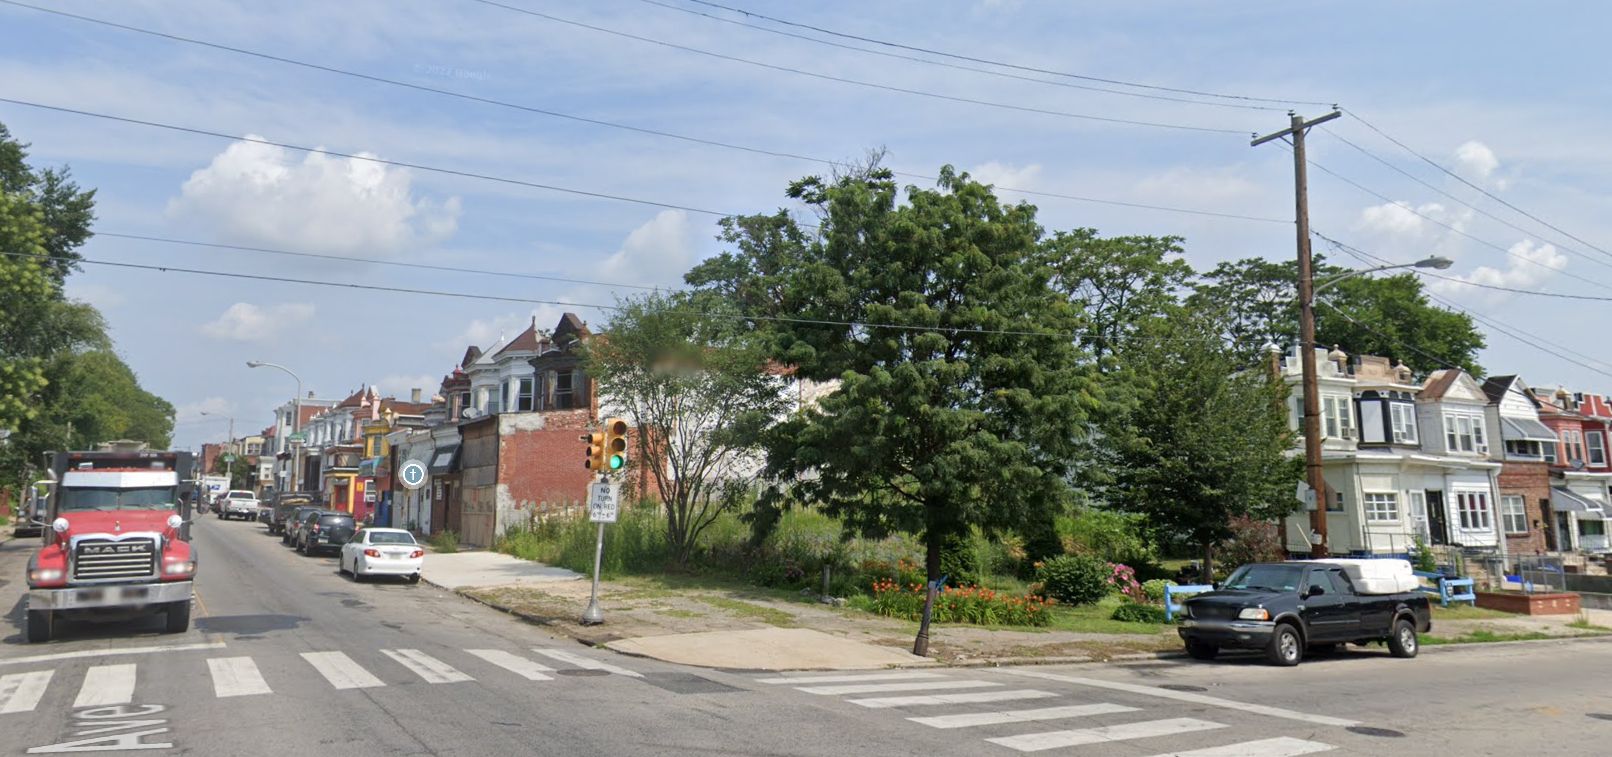 1437 South 58th Street. Site conditions prior to redevelopment. Looking north. July 2021. Credit: Google Maps